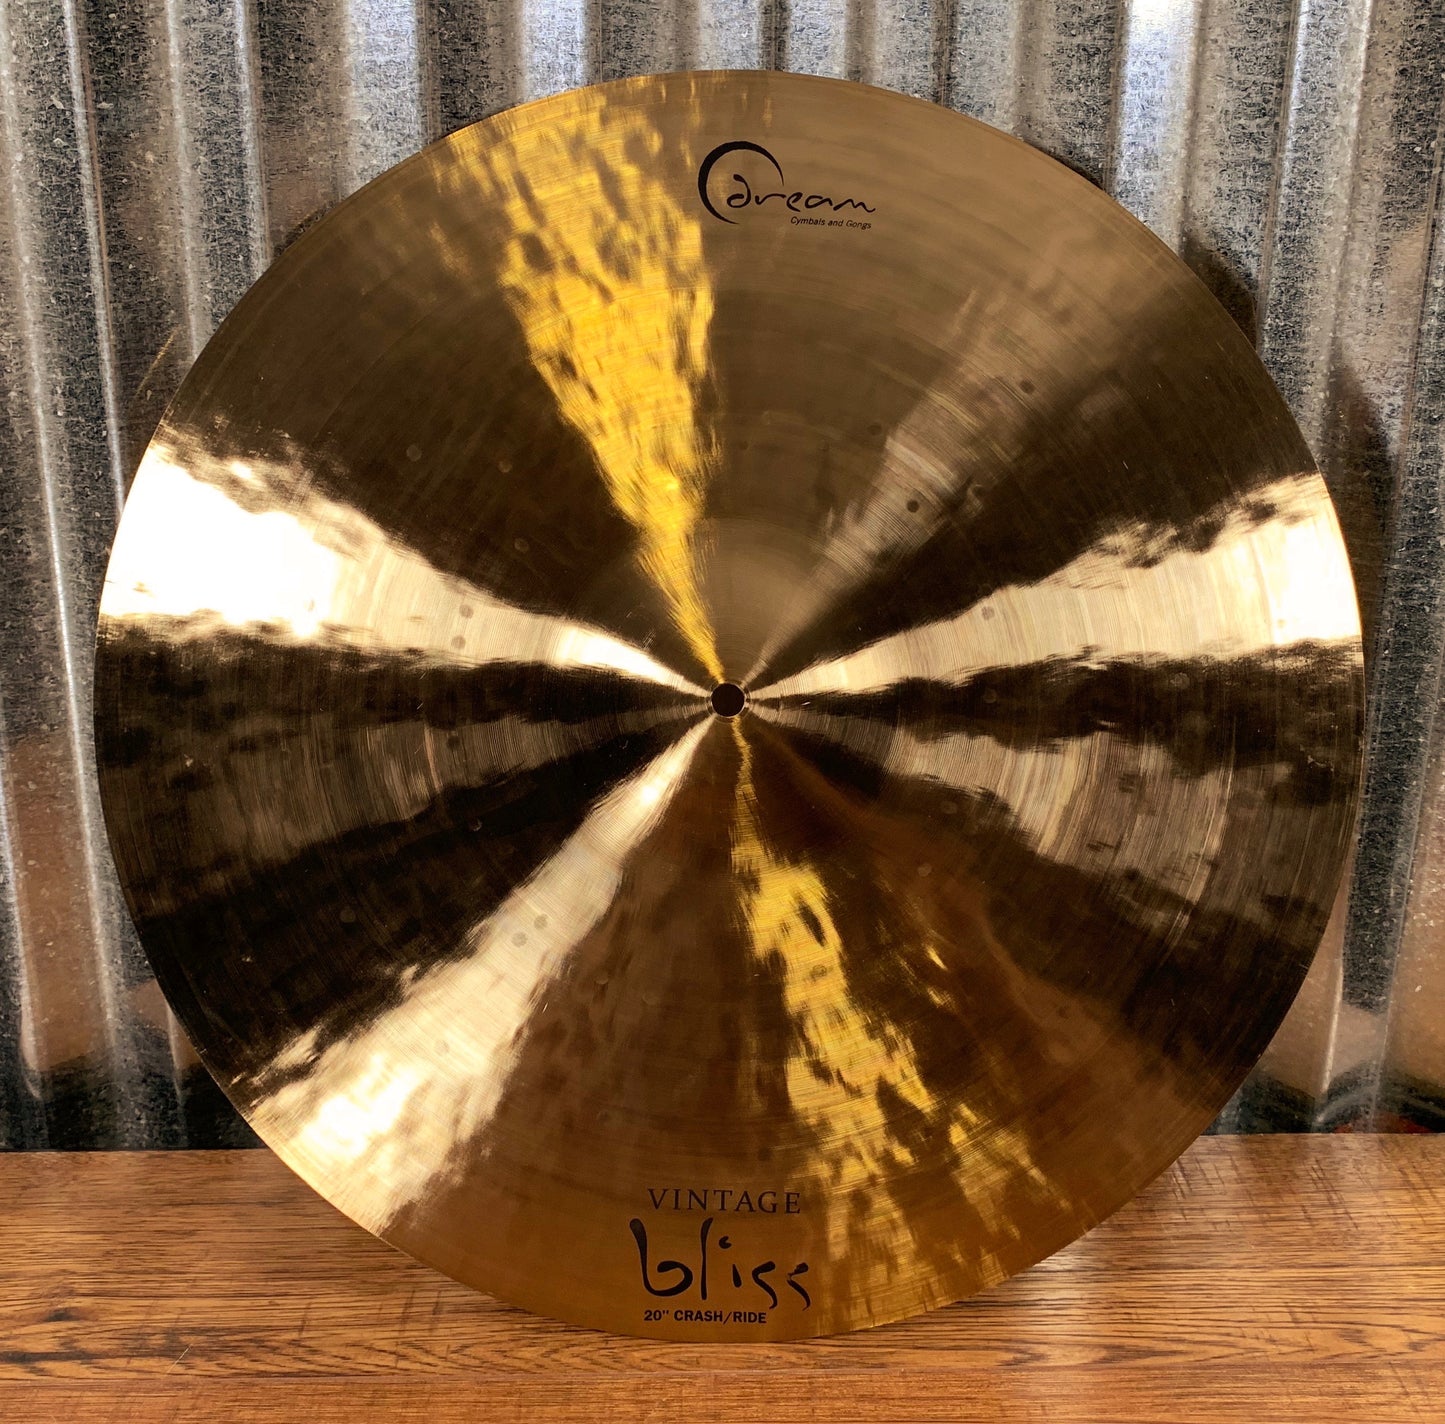 Dream Cymbals VBCRRI20 Vintage Bliss Hand Forged & Hammered 20" Crash Ride